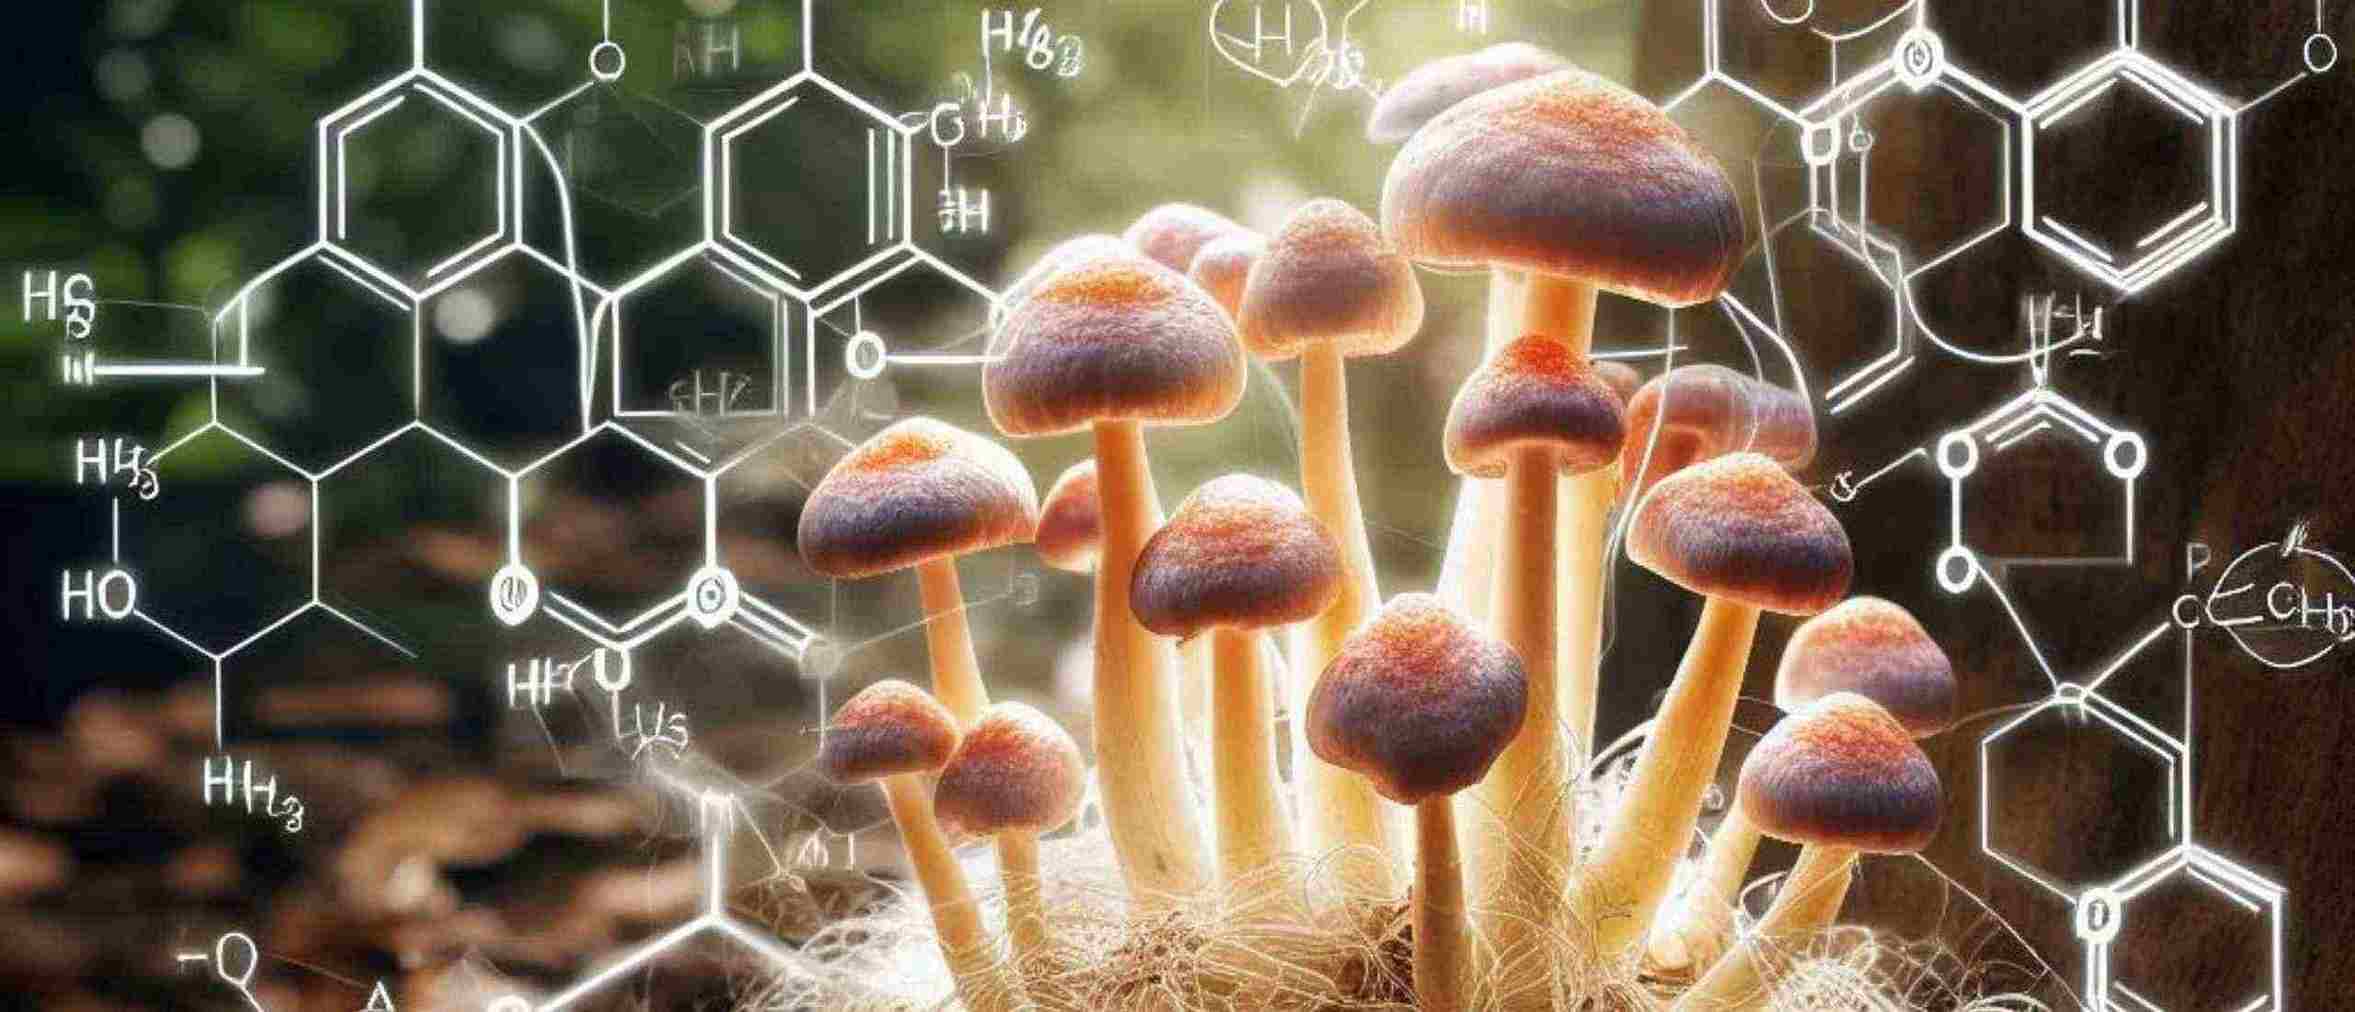 Protect Your Plate: Fungi's Role Against Heavy Metals